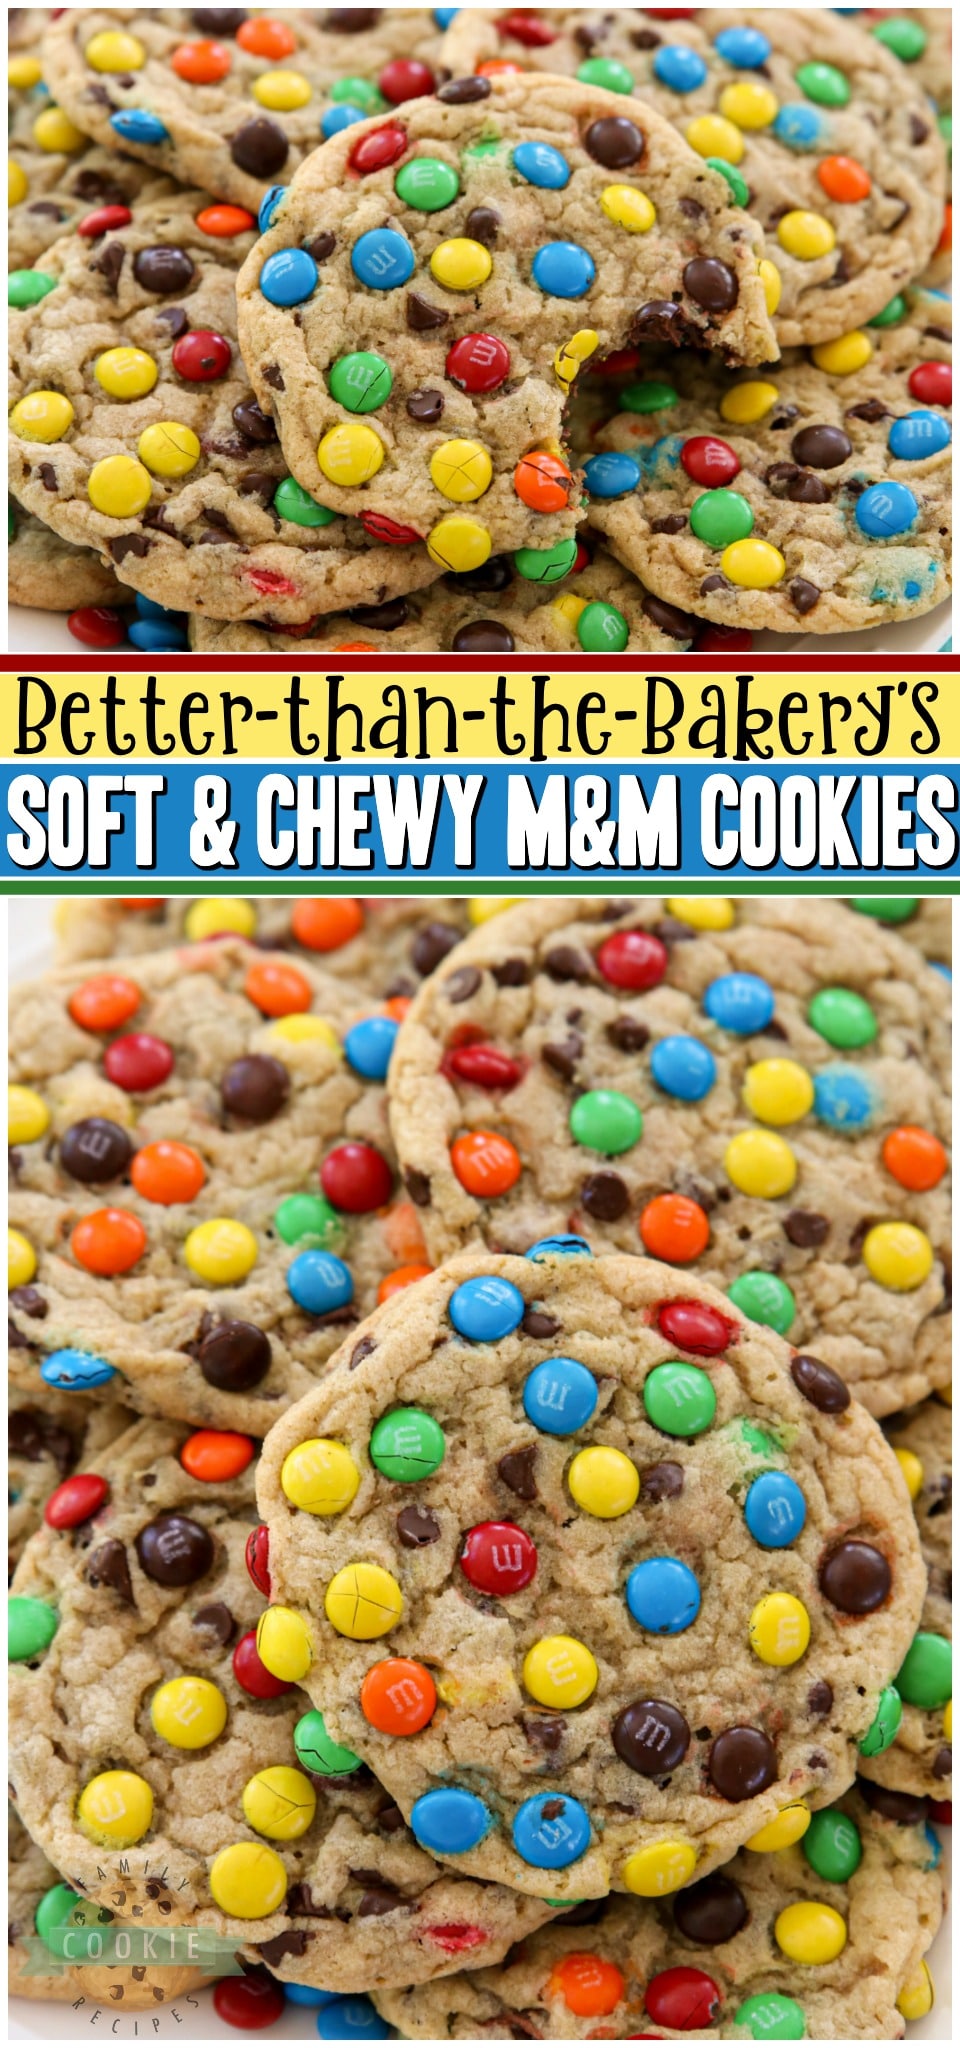 Soft & Chewy M&M Cookies made with butter, sugars, pudding mix & M&M's candy! Easy tip for coating your cookies PERFECTLY with M&M's! BEST M&M Cookie recipe ever! 